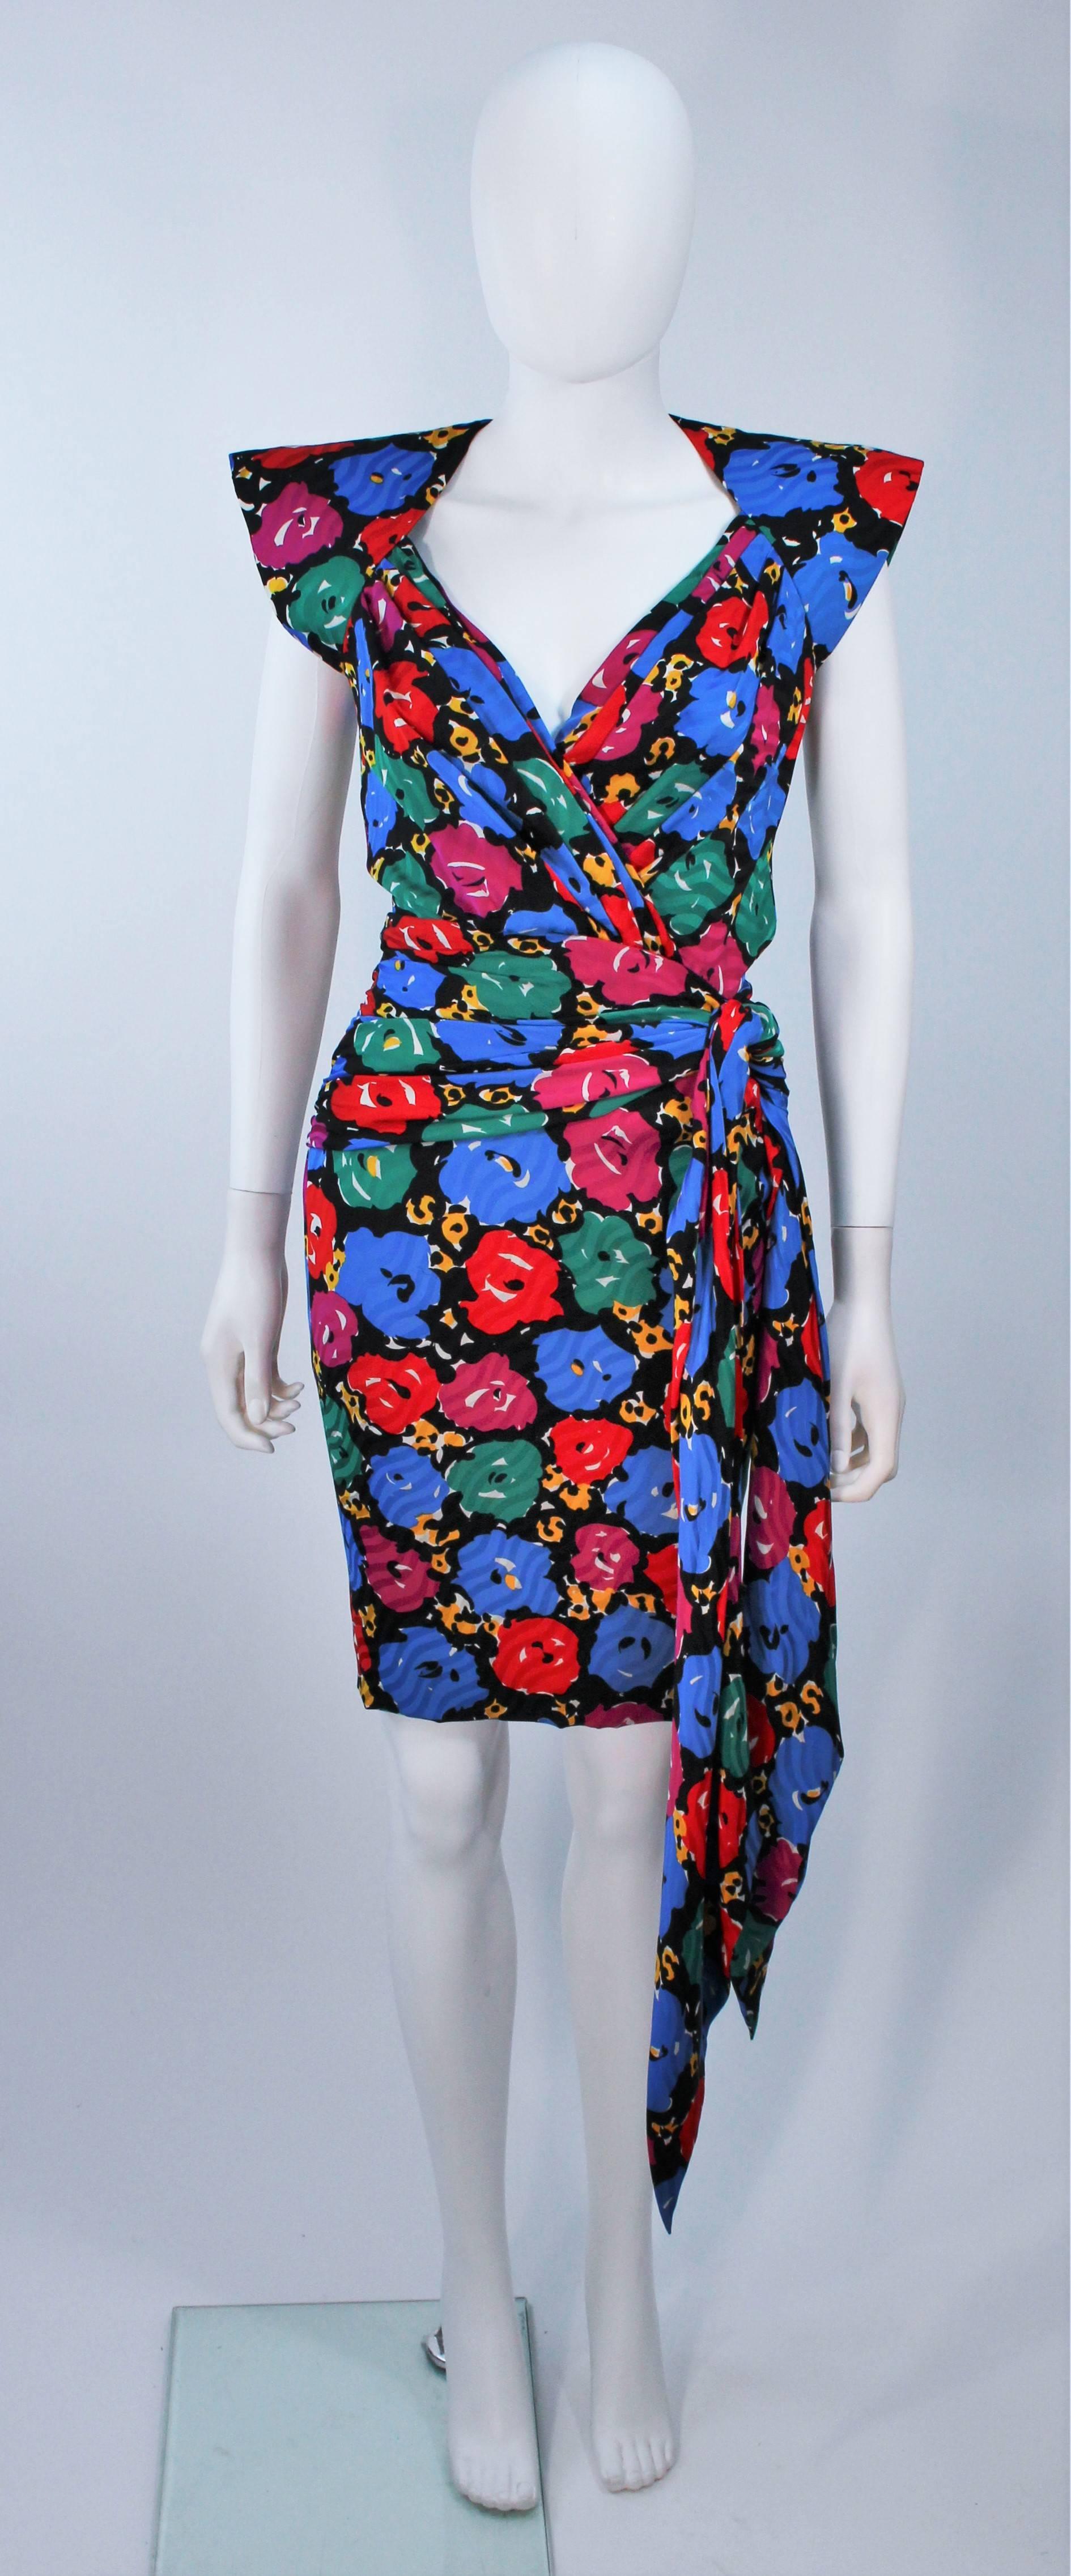  This Andrea Odicini cocktail dress is composed of a printed silk with floral print in a primary color story. Features structured shoulder with a side drape design. There is a center back zipper closure. In excellent vintage condition. 

 